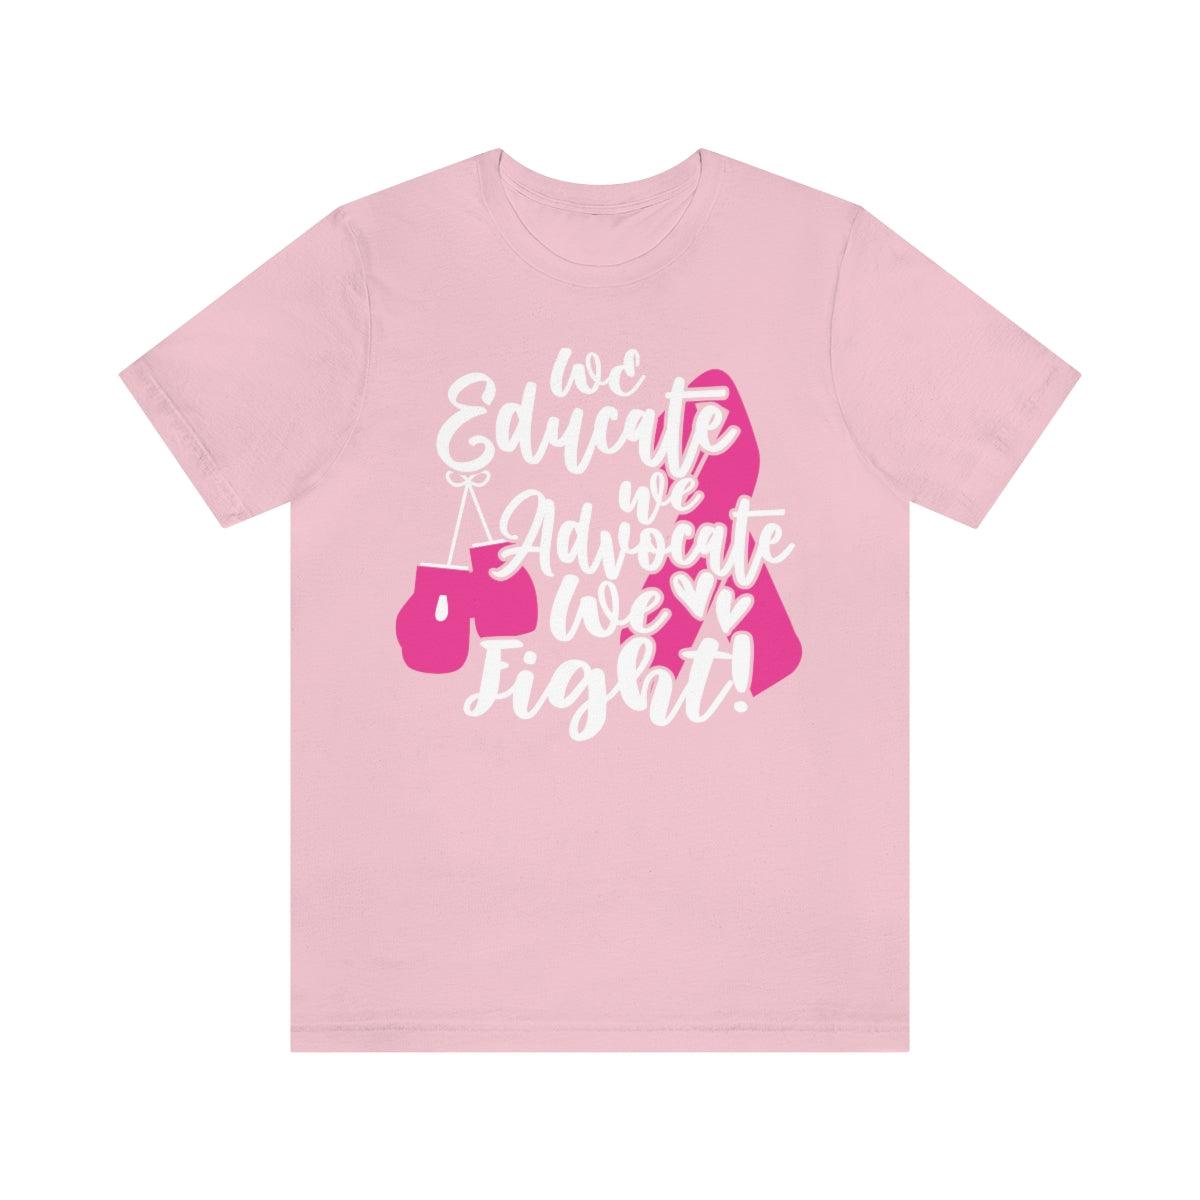 We educate. We advocate. We fight! Tee (Gloves) - Sharp Tact Kreativ | Tees & Gifts with Encouraging Messages to Brighten Your Day with a Bit of Wit